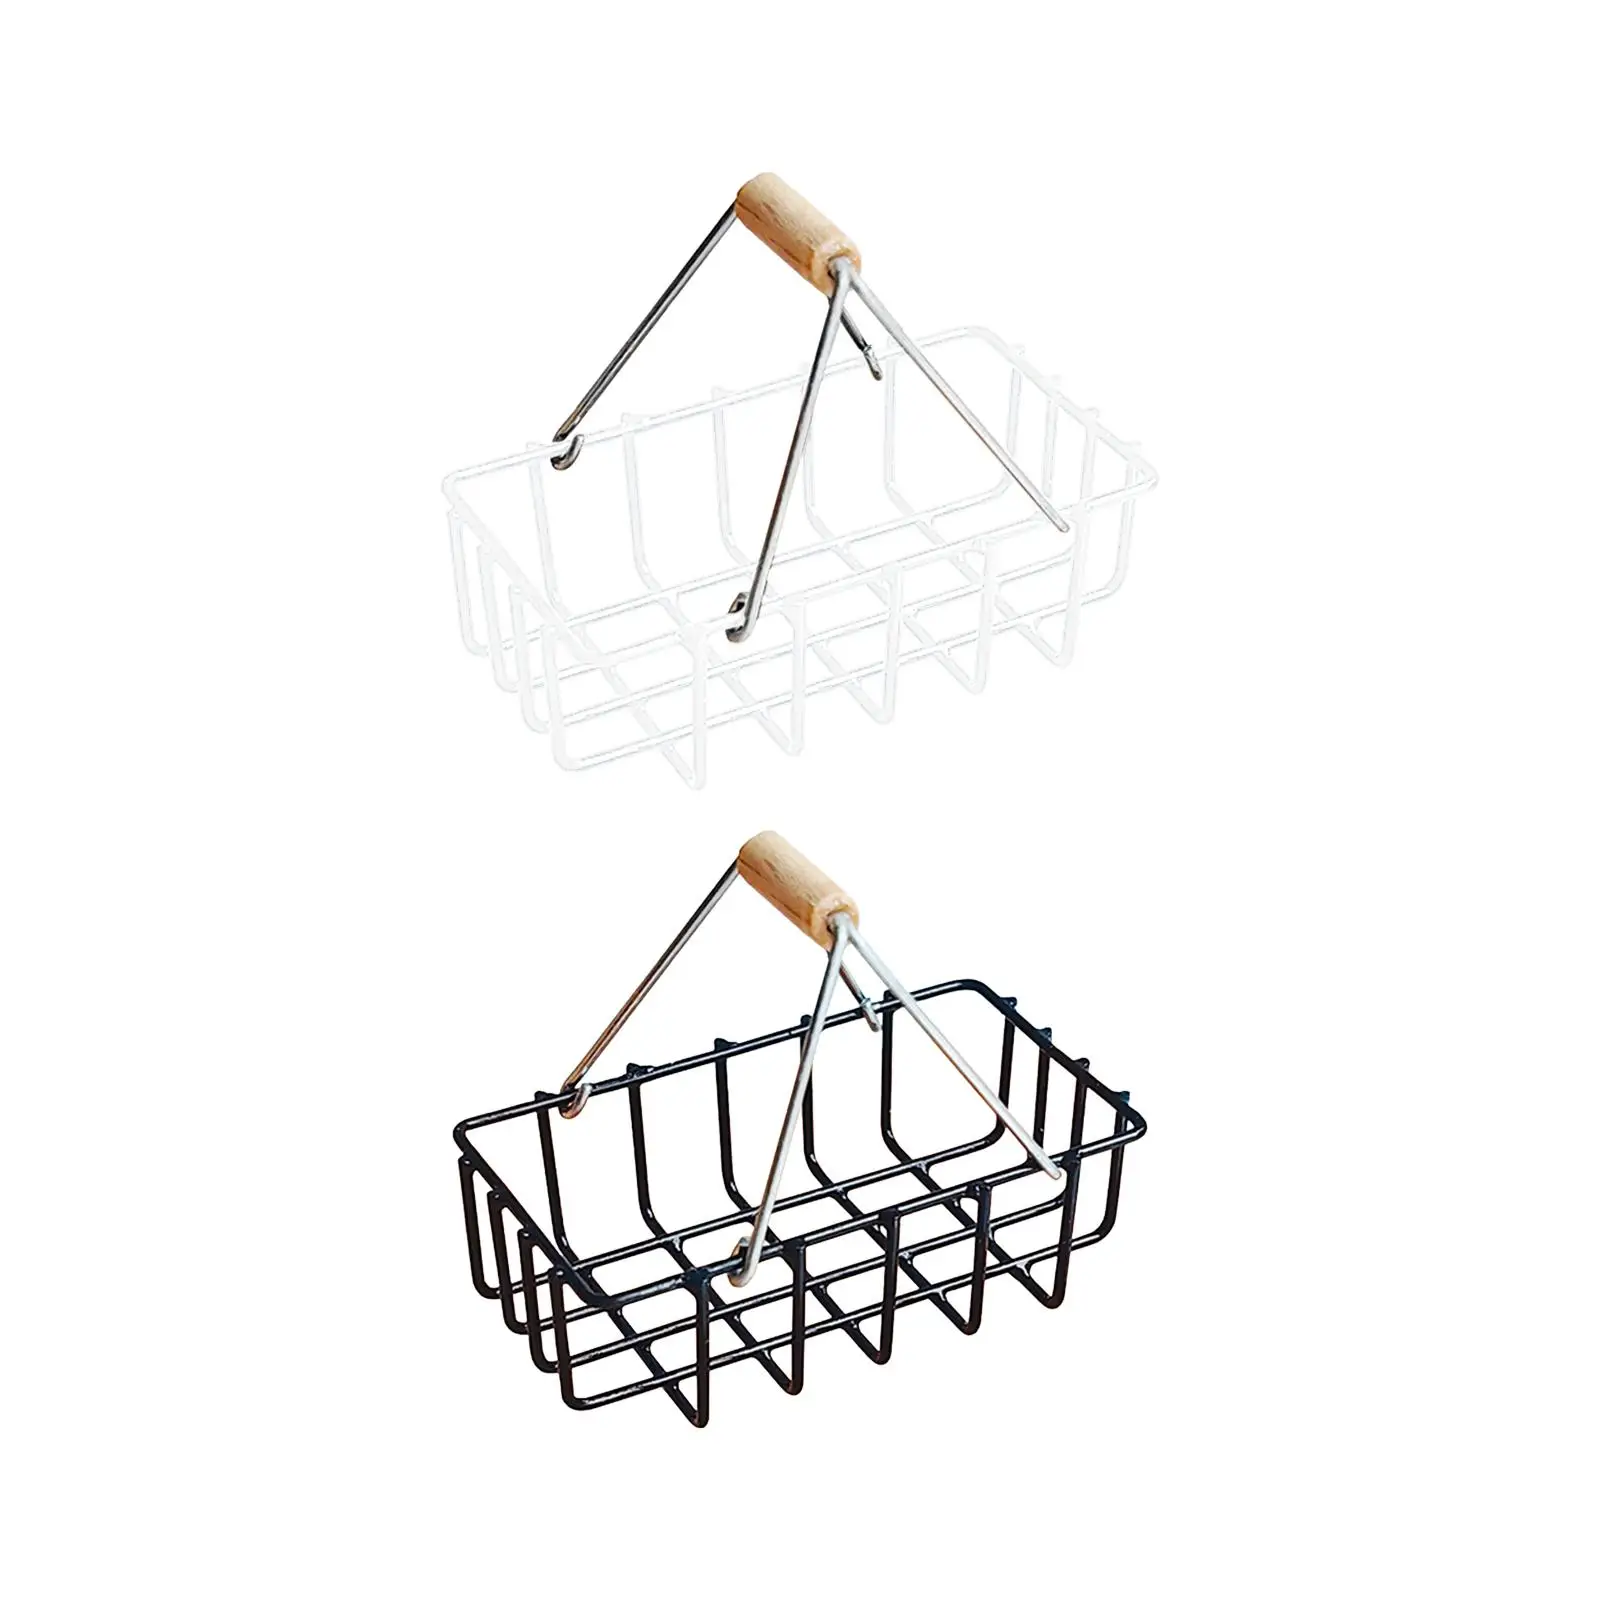 1:8 1:6 Miniature Alloy Storage Basket Dollhouse Shopping Basket with Handles for Living Room Scenery Supplies Decoration